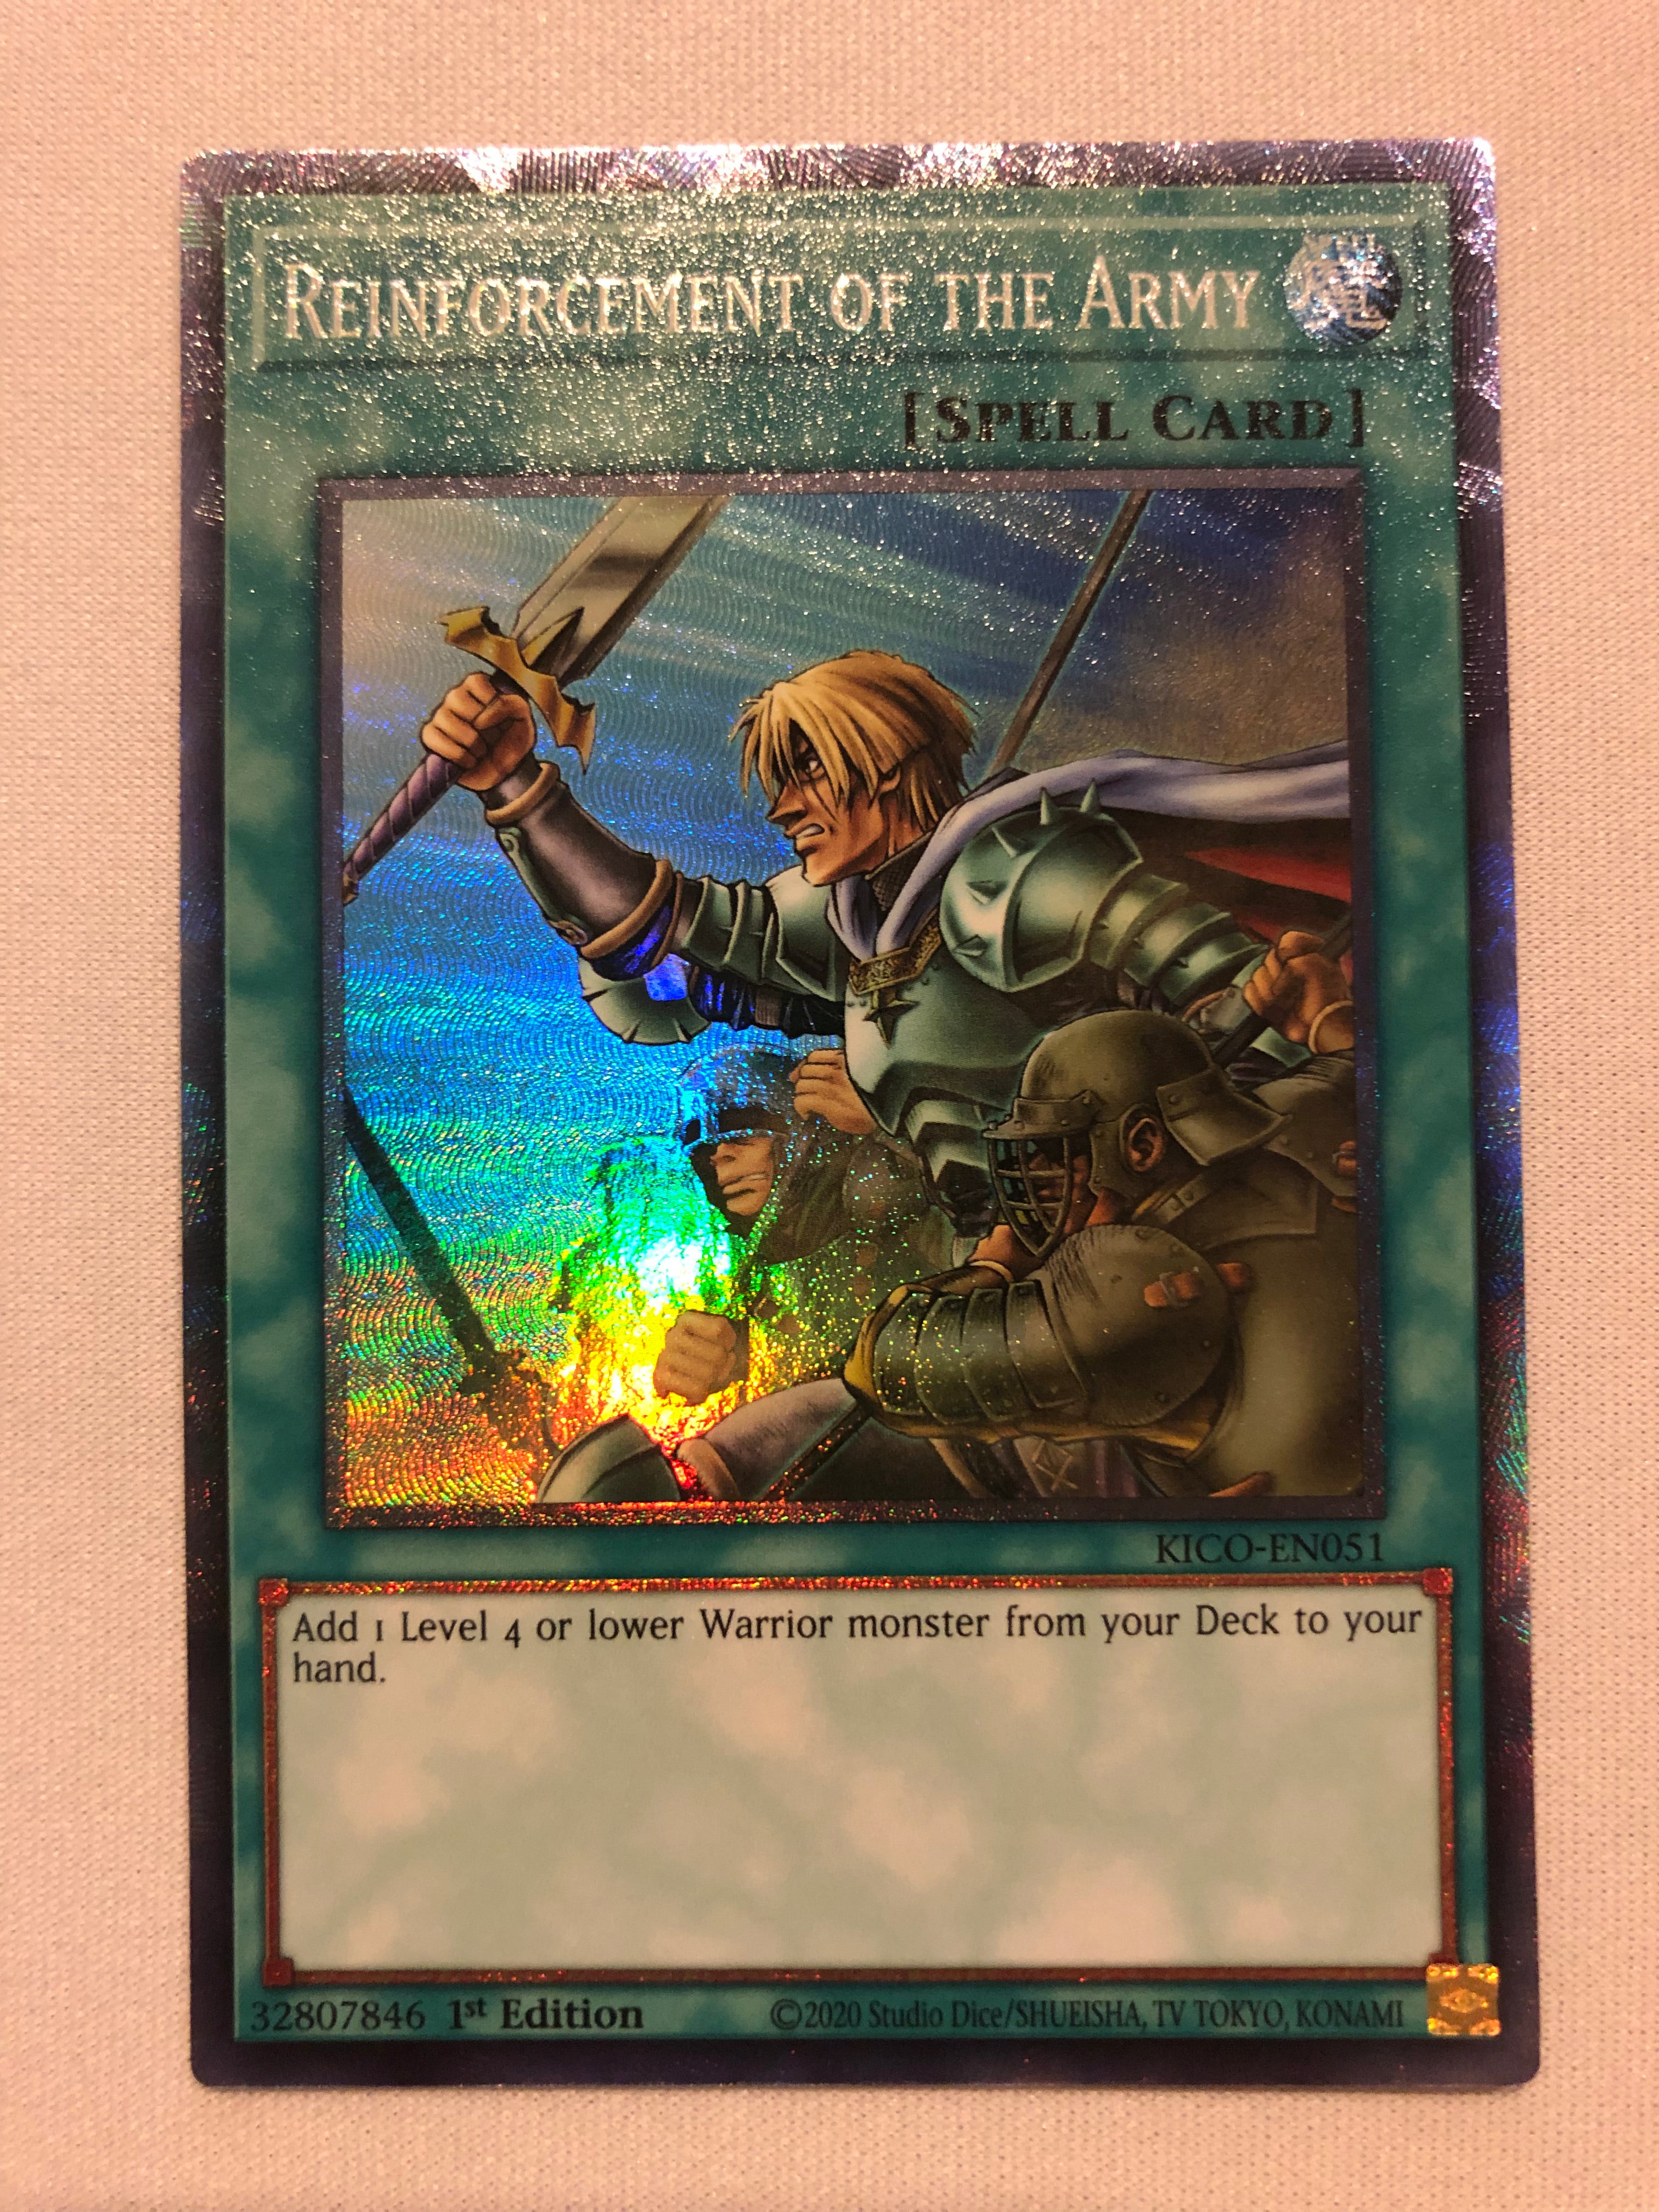 Yugioh Reinforcement of the Army KICO-EN051 Collectors Rare 1st Edition  Near Mint